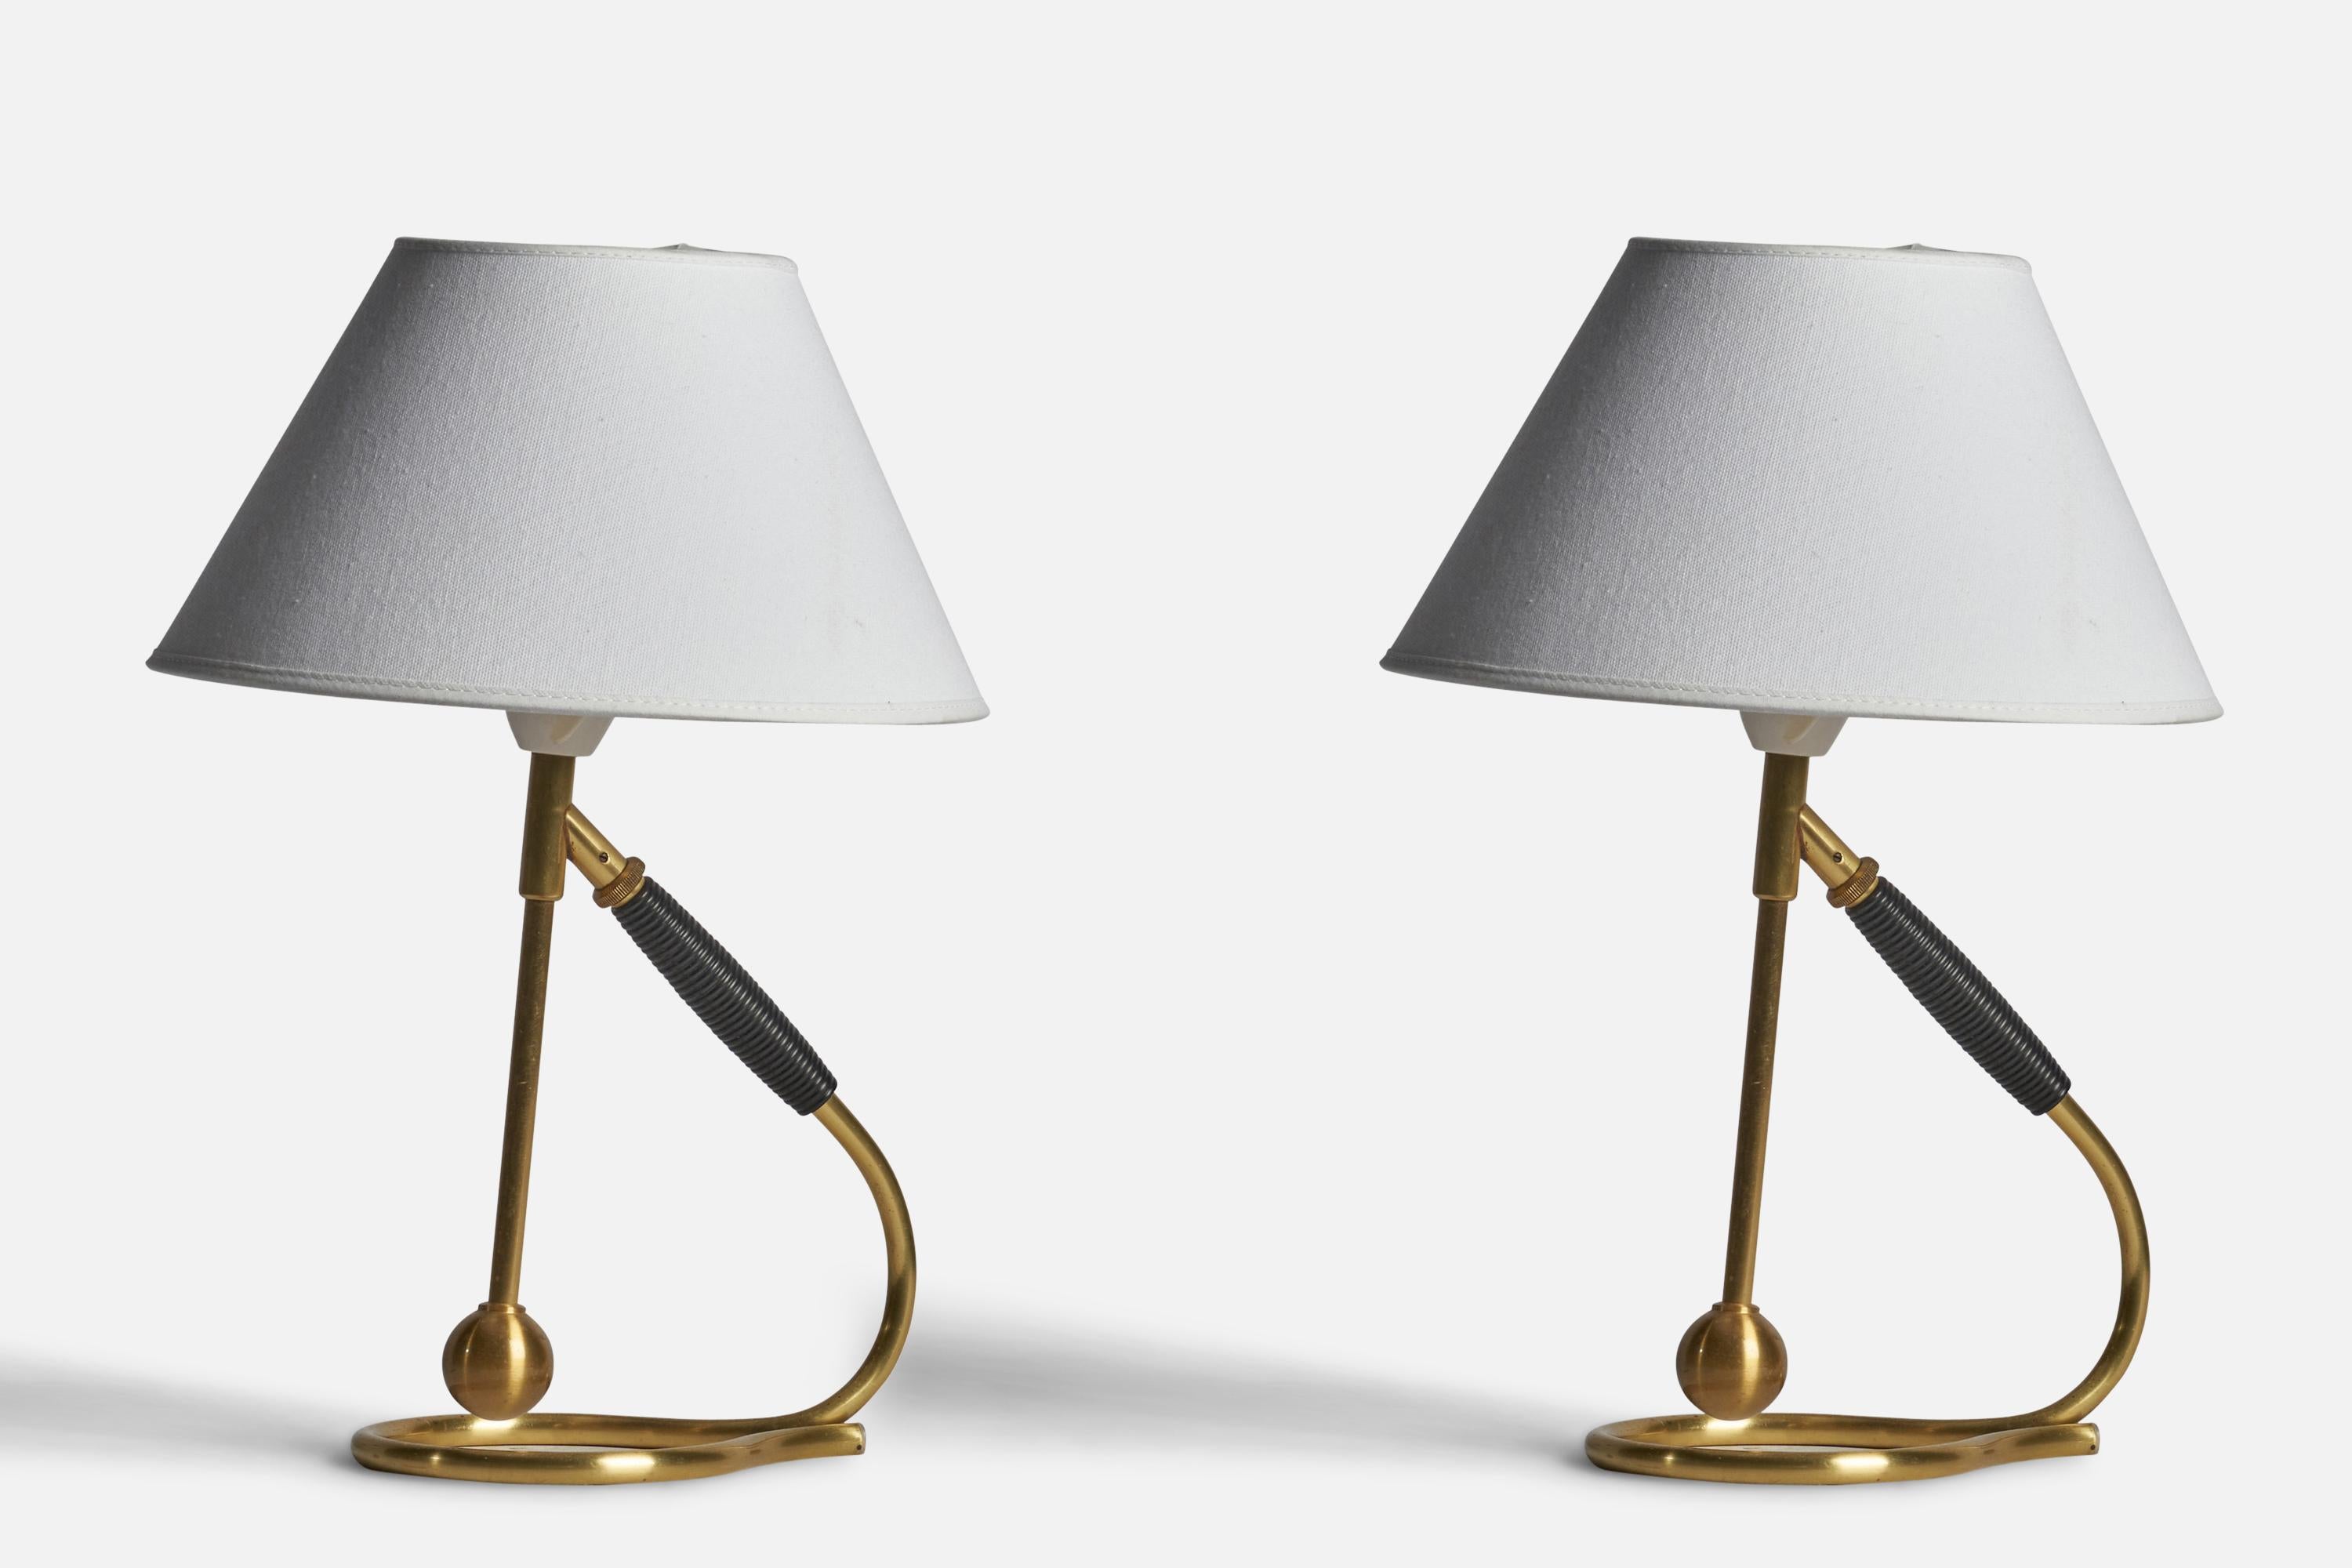 A pair of adjustable brass and rubber table or wall lights designed by Kaare Klint and produced by Le Klint, Denmark, c. 1950s.

Dimensions of Lamp (inches): 11.4”H x 4.7” W x 7” D
Dimensions of Shade (inches): 4.5” Top Diameter x 10” Bottom